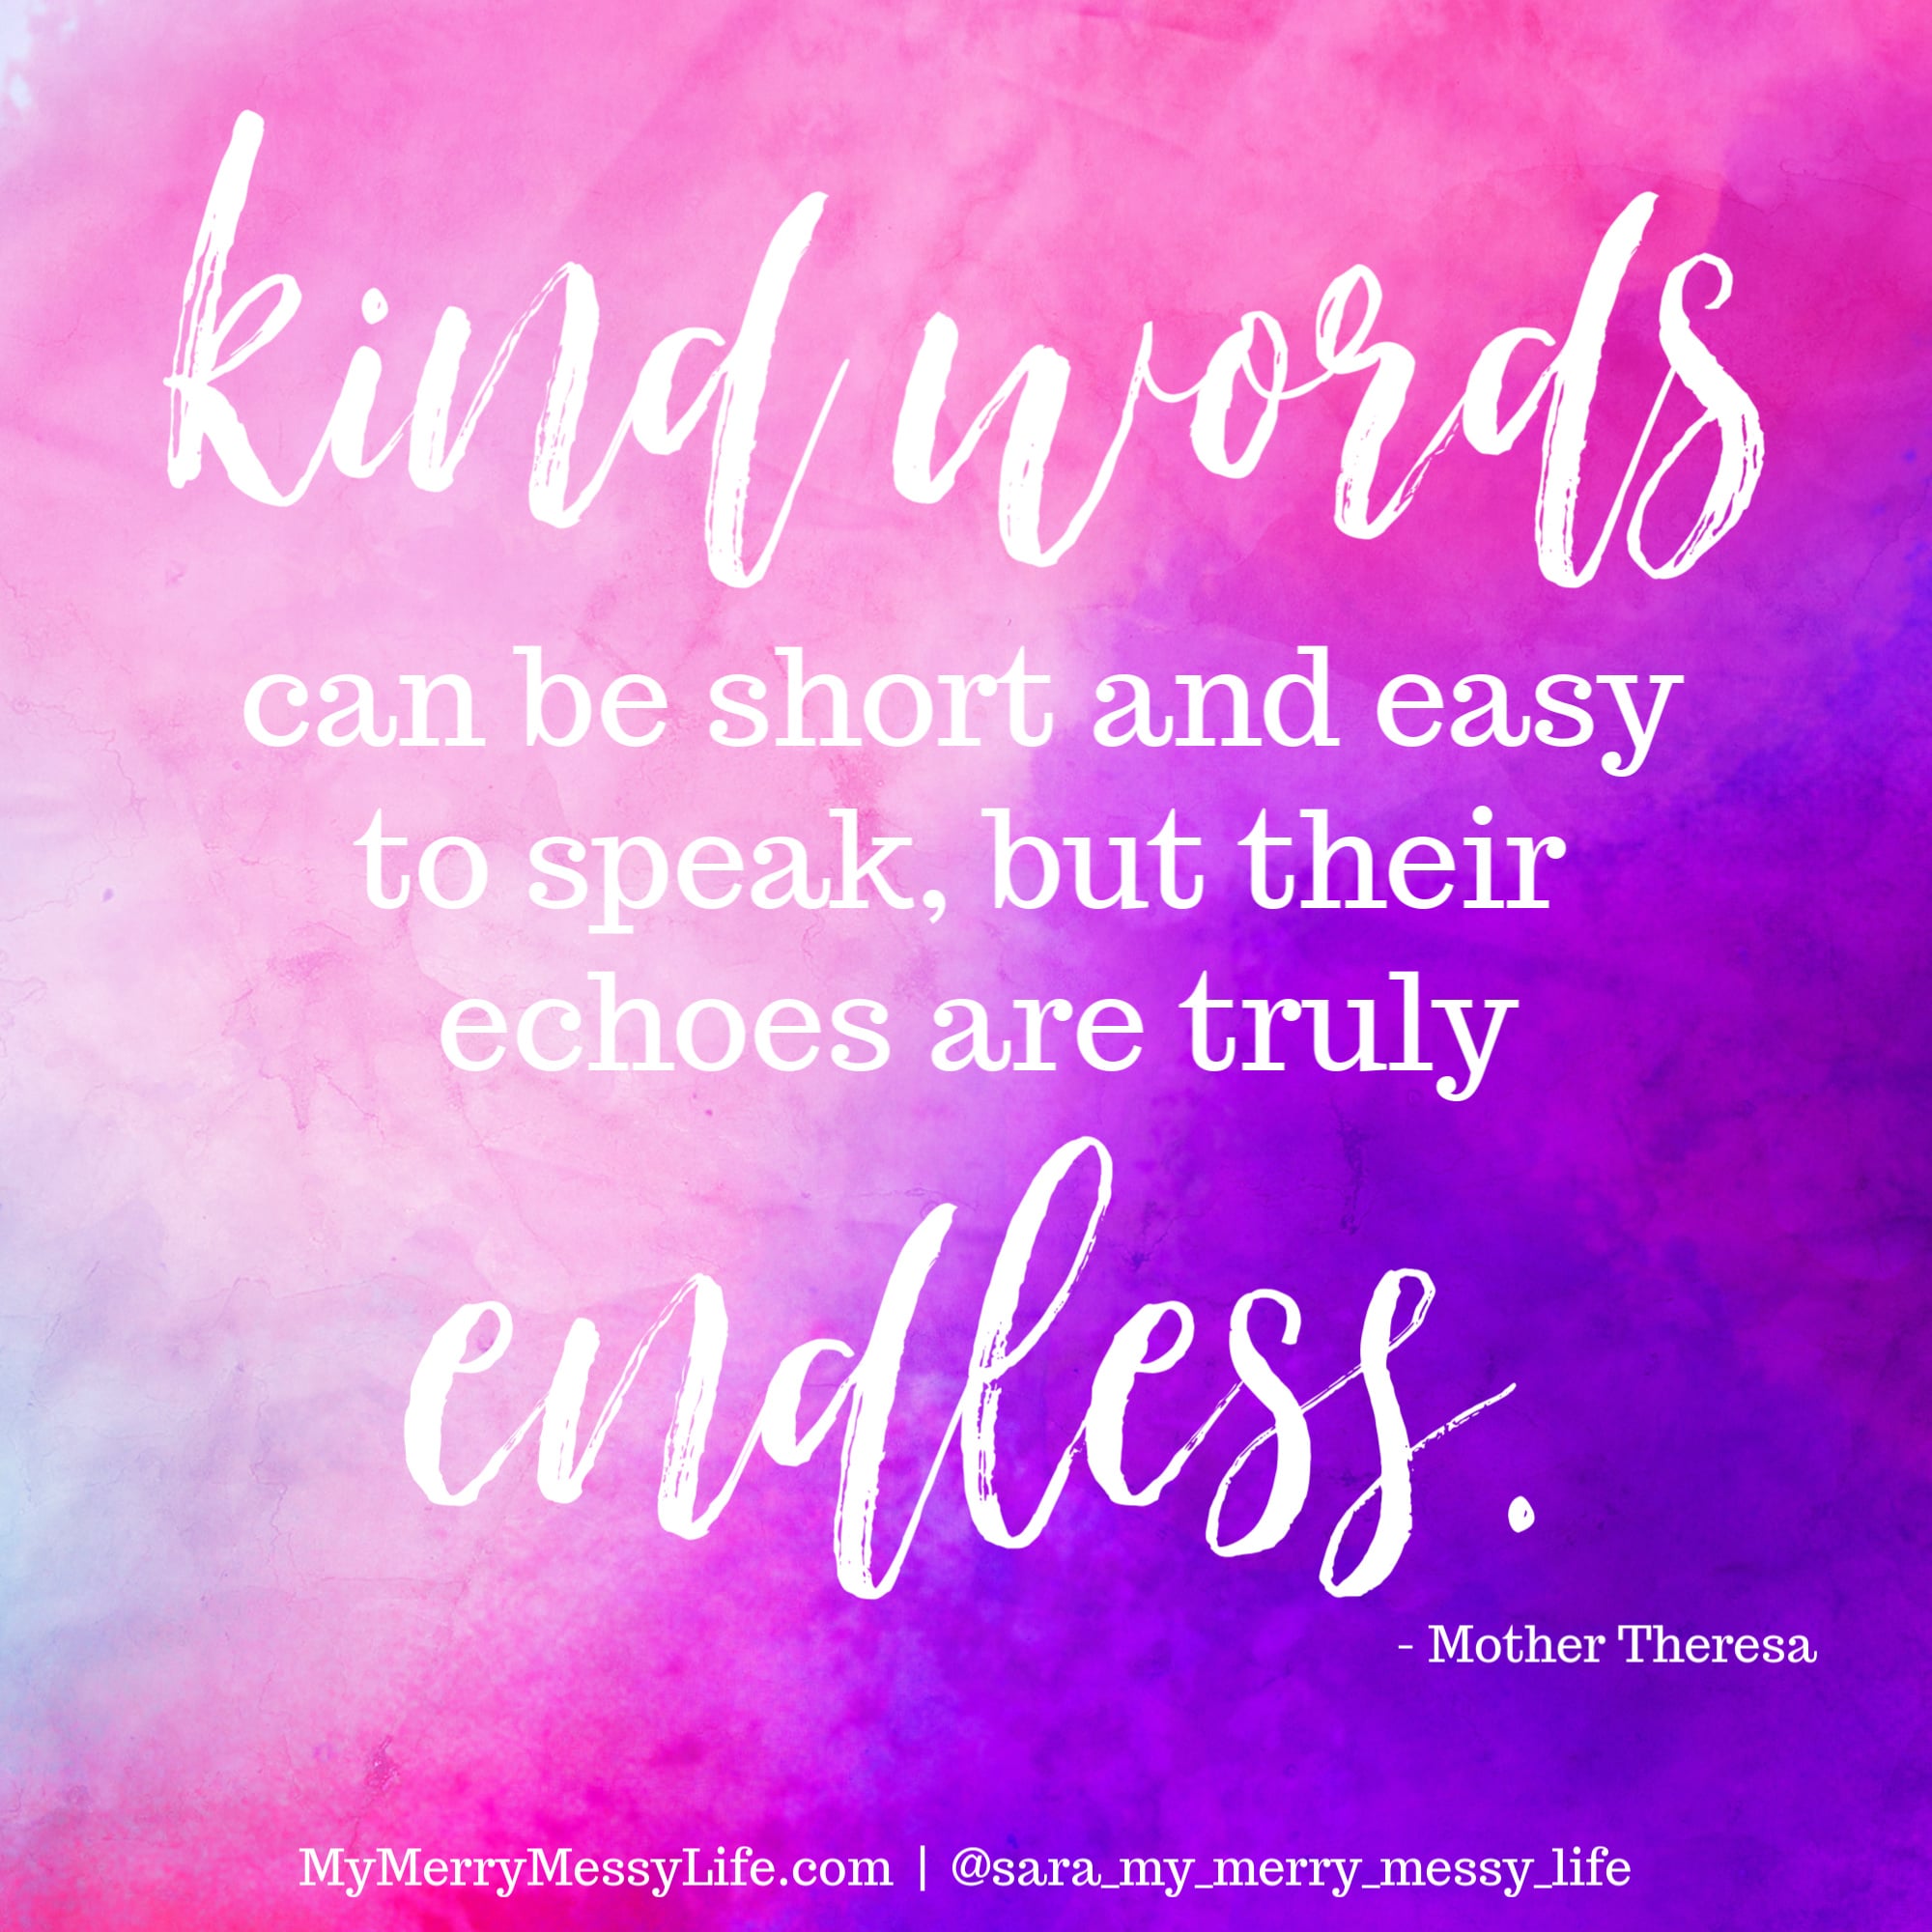 Kind words can be short and easy to speak, but their echos are truly endless. - Mother Theresa